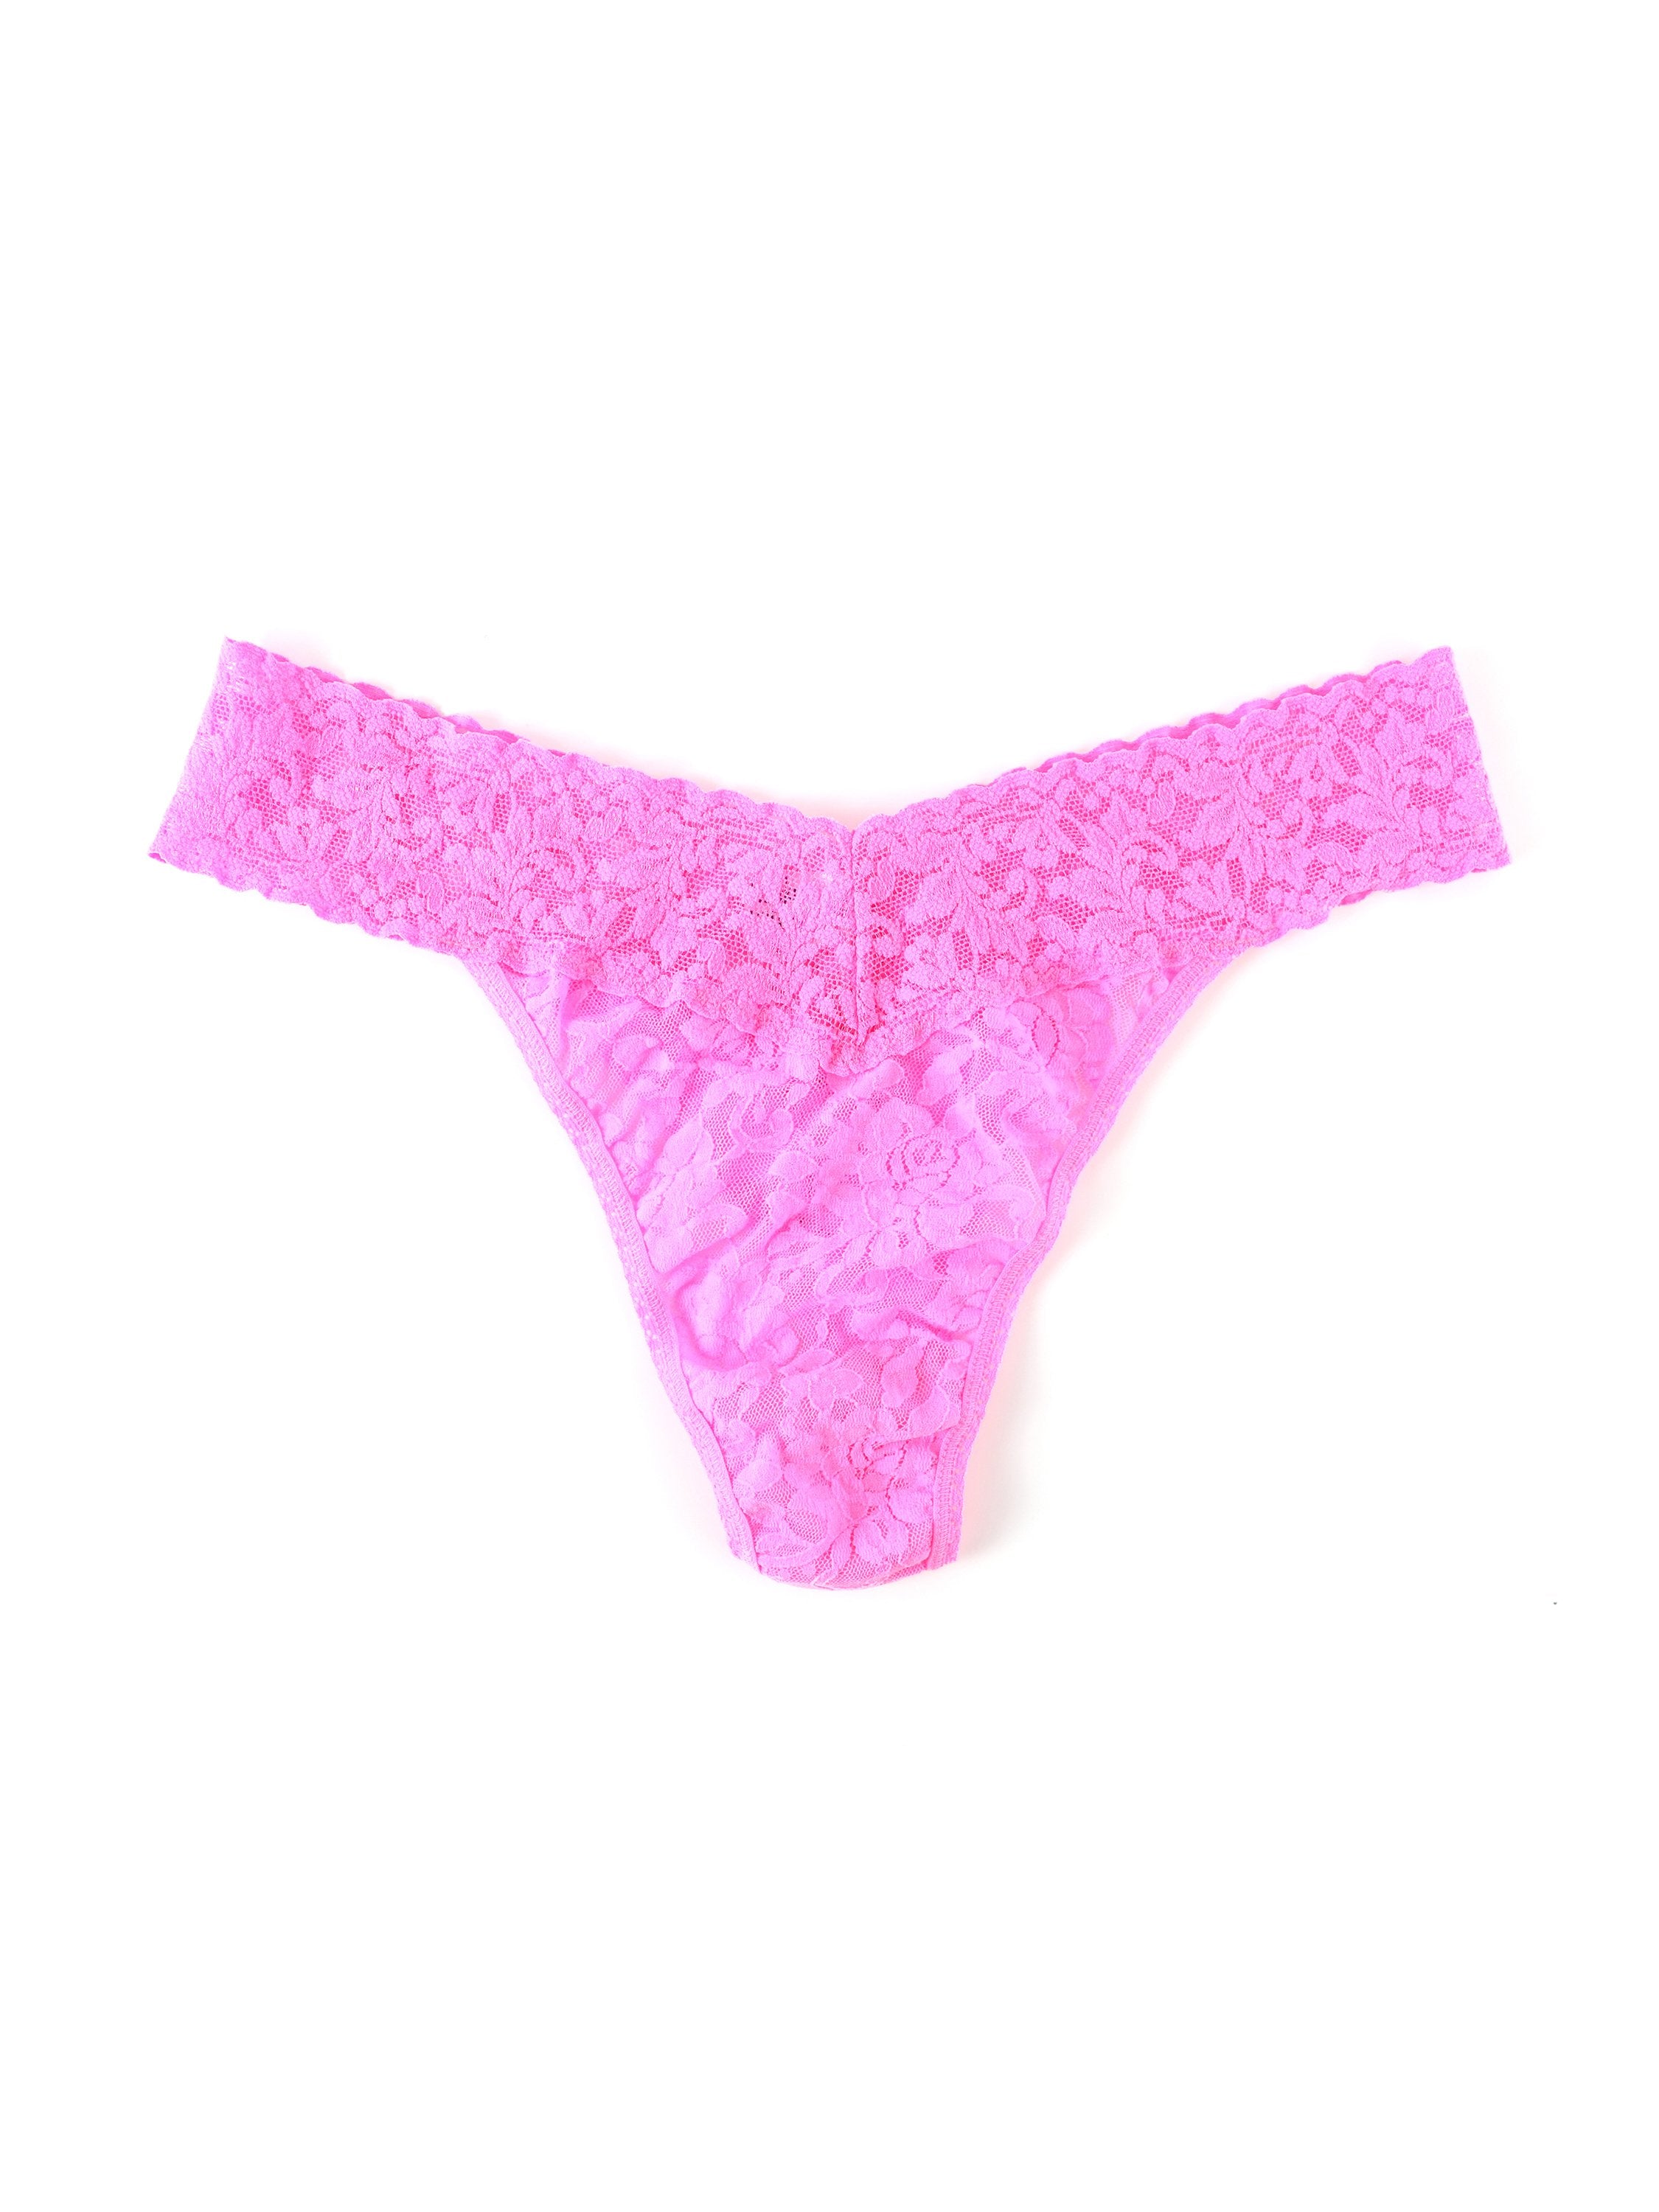 Rolled Signature Lace Original Rise Thong Multiple Solid Colours